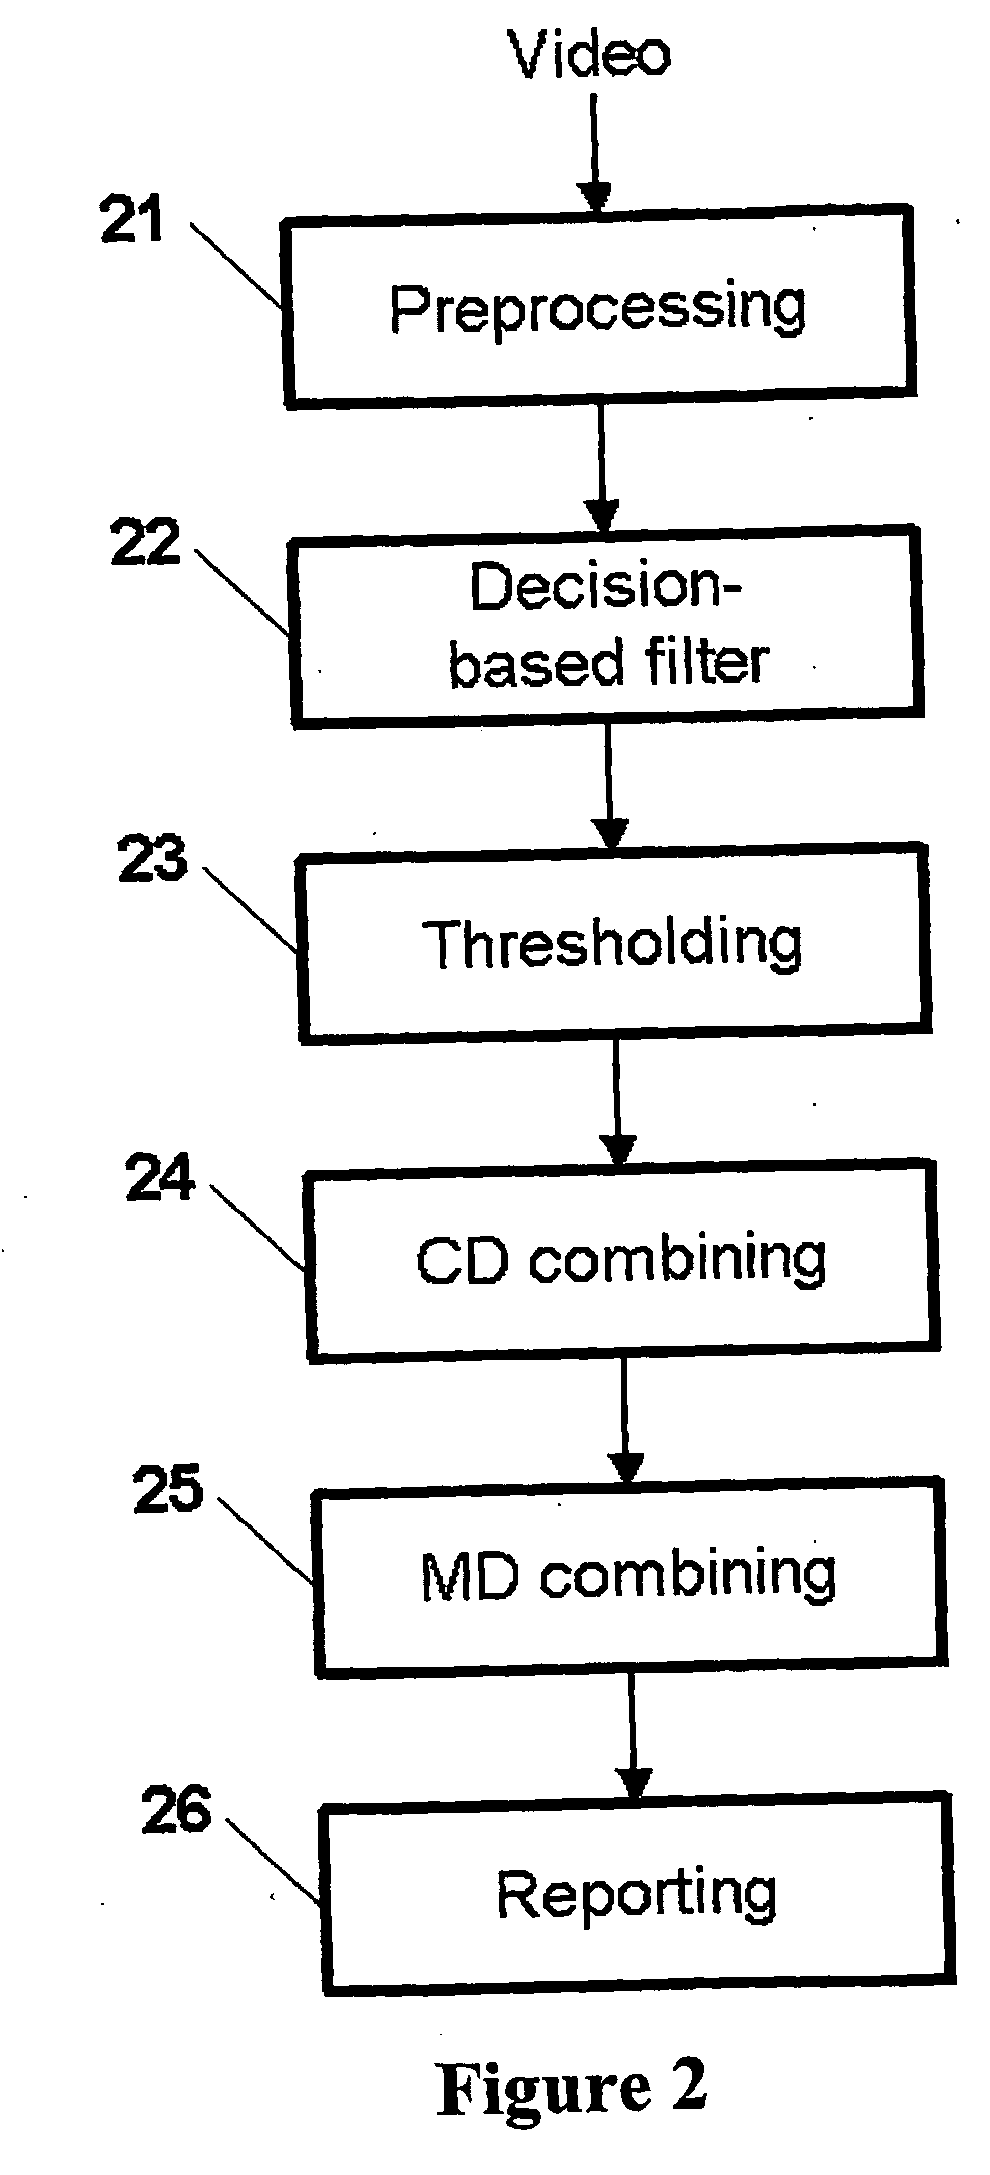 Method and Product for Detecting Abnormalities